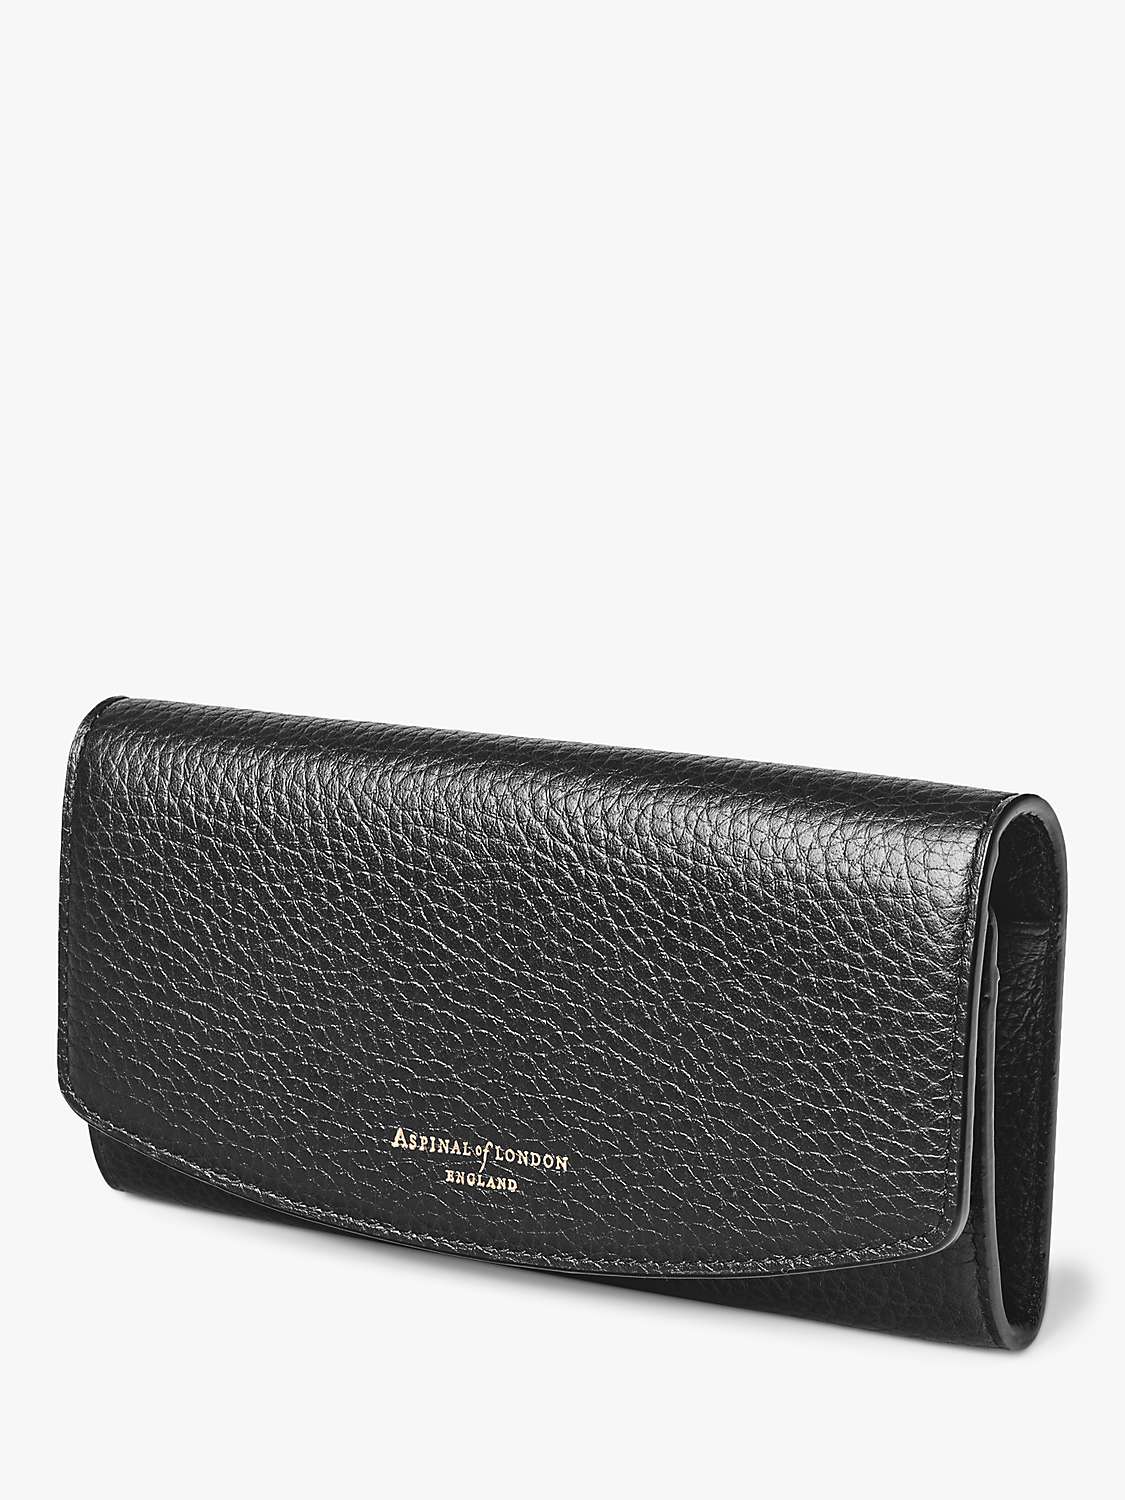 Buy Aspinal of London Essential Pebble Leather Purse Online at johnlewis.com